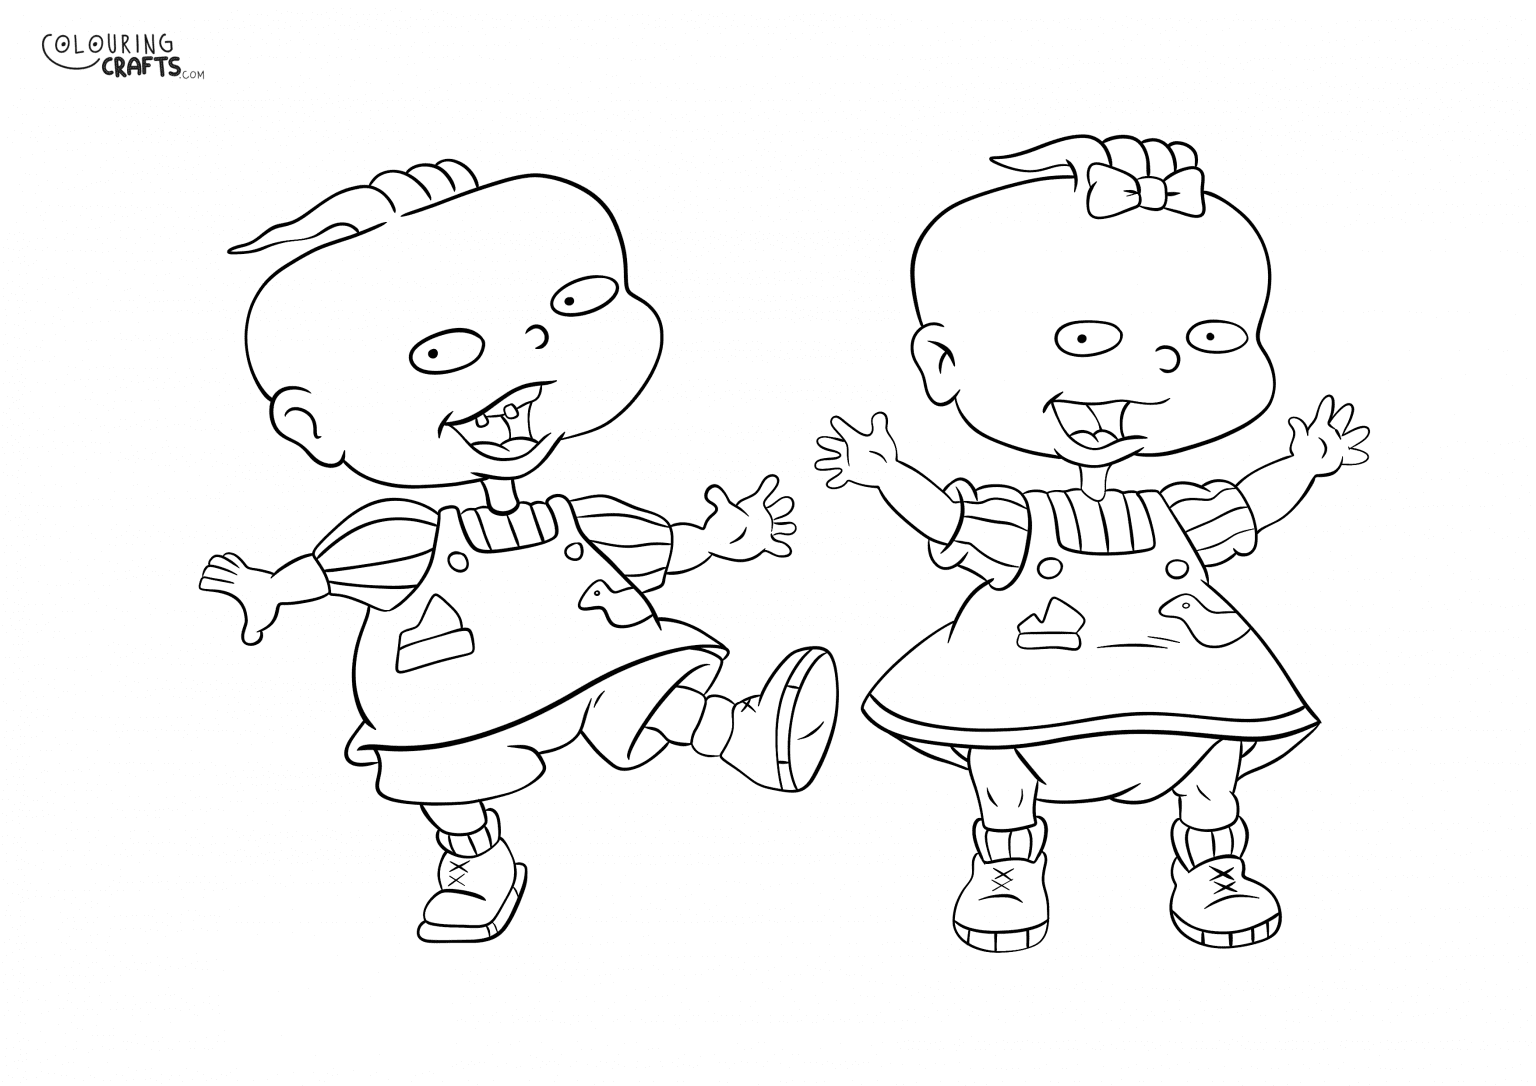 Phil And Lillian Rugrats Colouring Page - Colouring Crafts